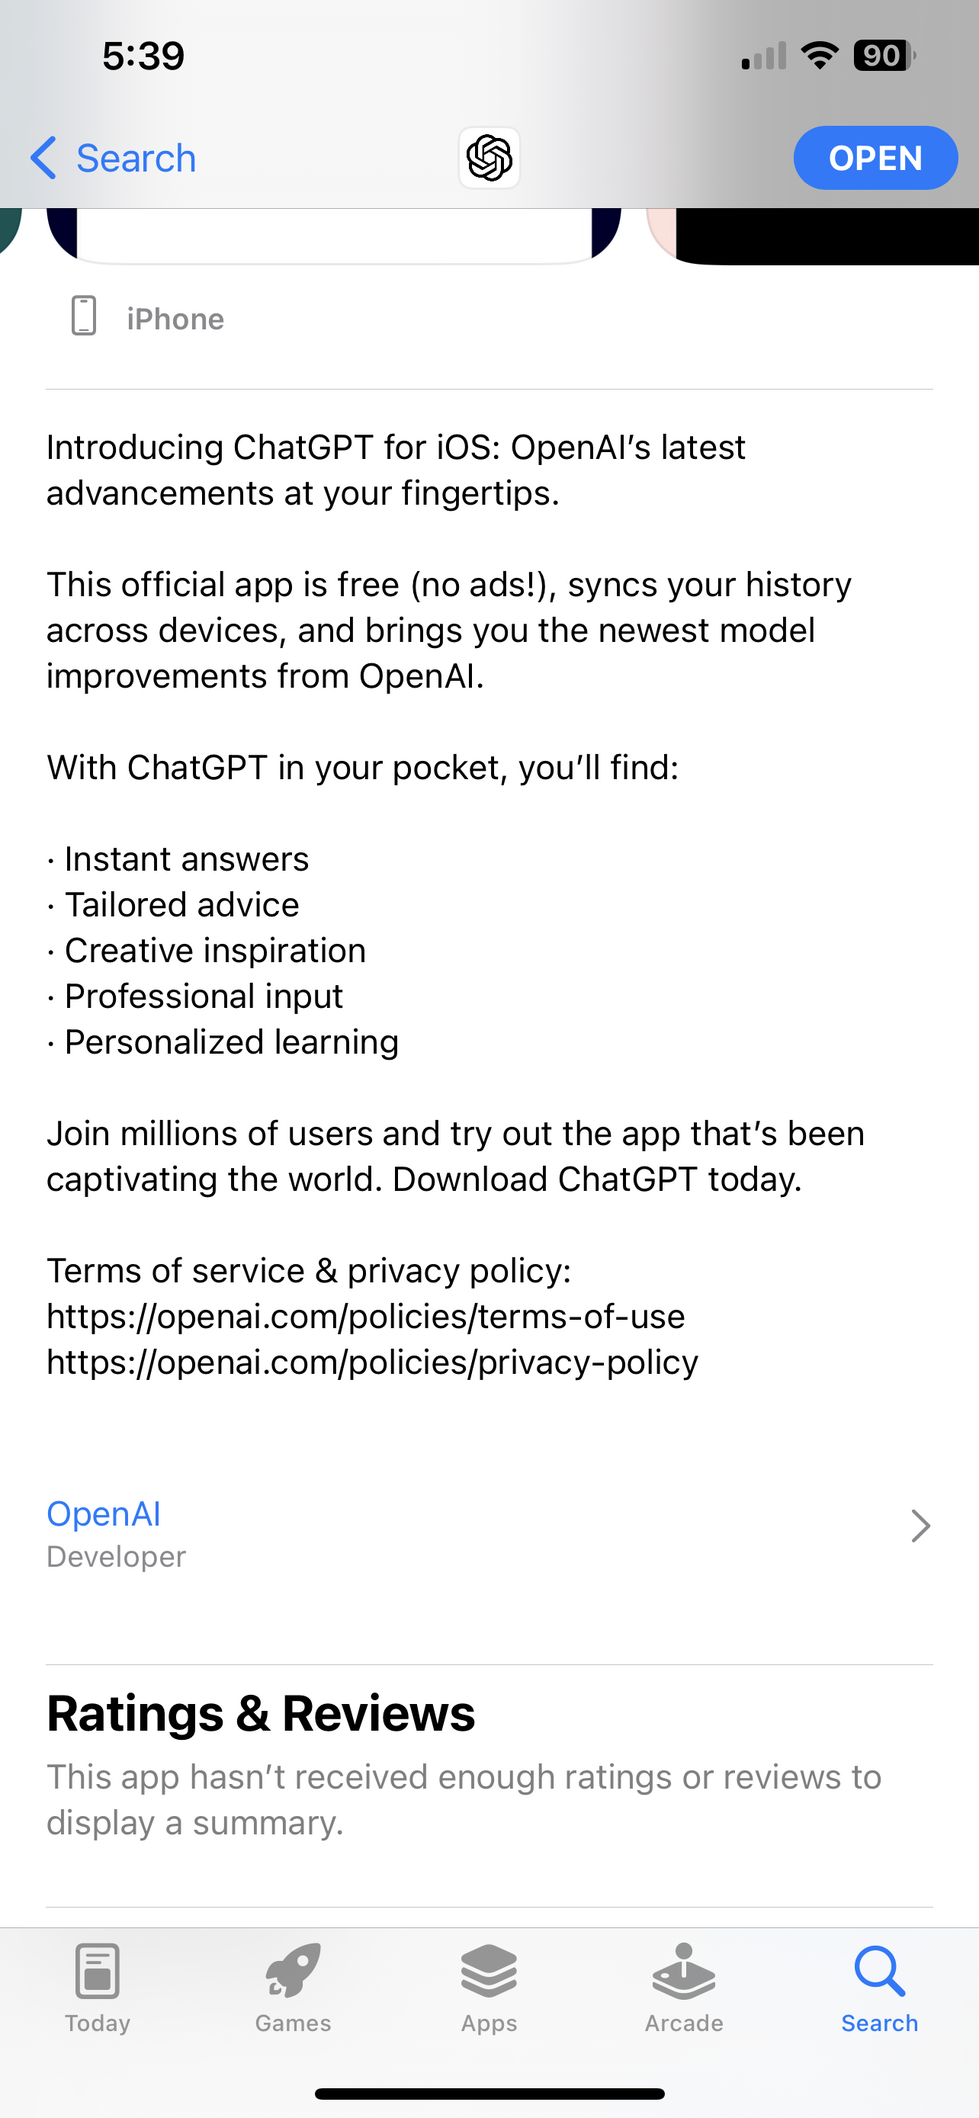 A screenshot of the marketing copy for OpenAI’s chat GPT app that describes it as a source of advice without any caution or disclaimer.